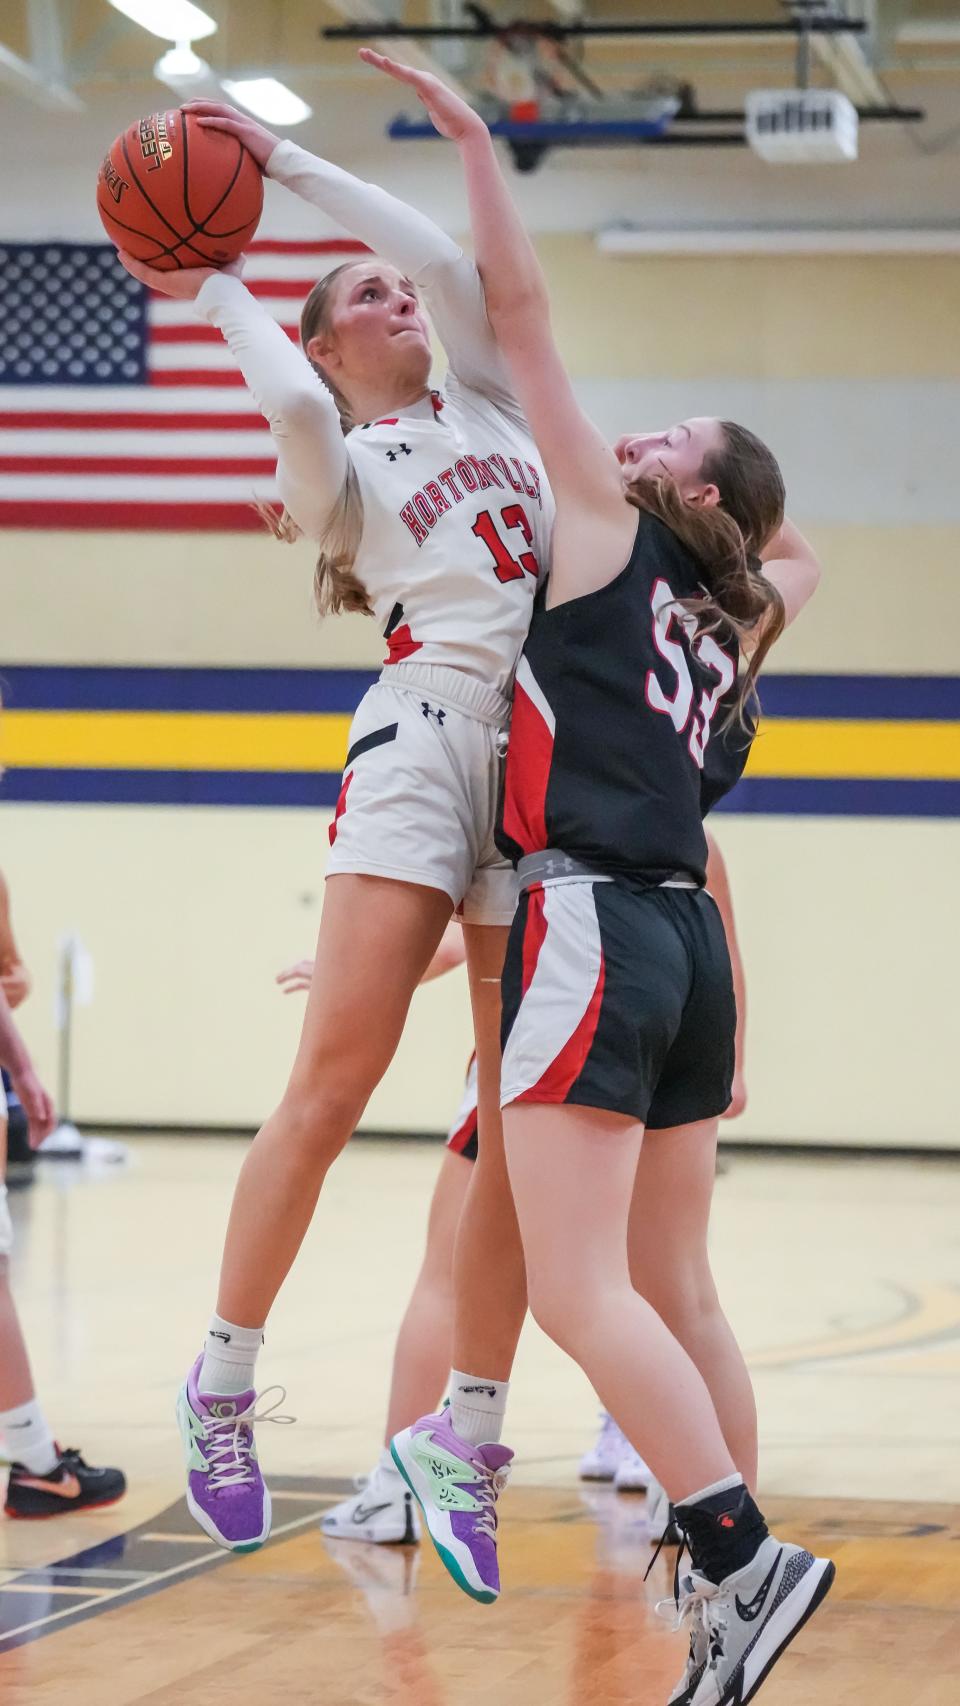 Hortonville's Mikayla Werner (13) puts up a shot over Pewaukee's Maddie Chabot during a game at the Kettle Moraine Thanksgiving Classic girls basketball tournament on Nov. 24.